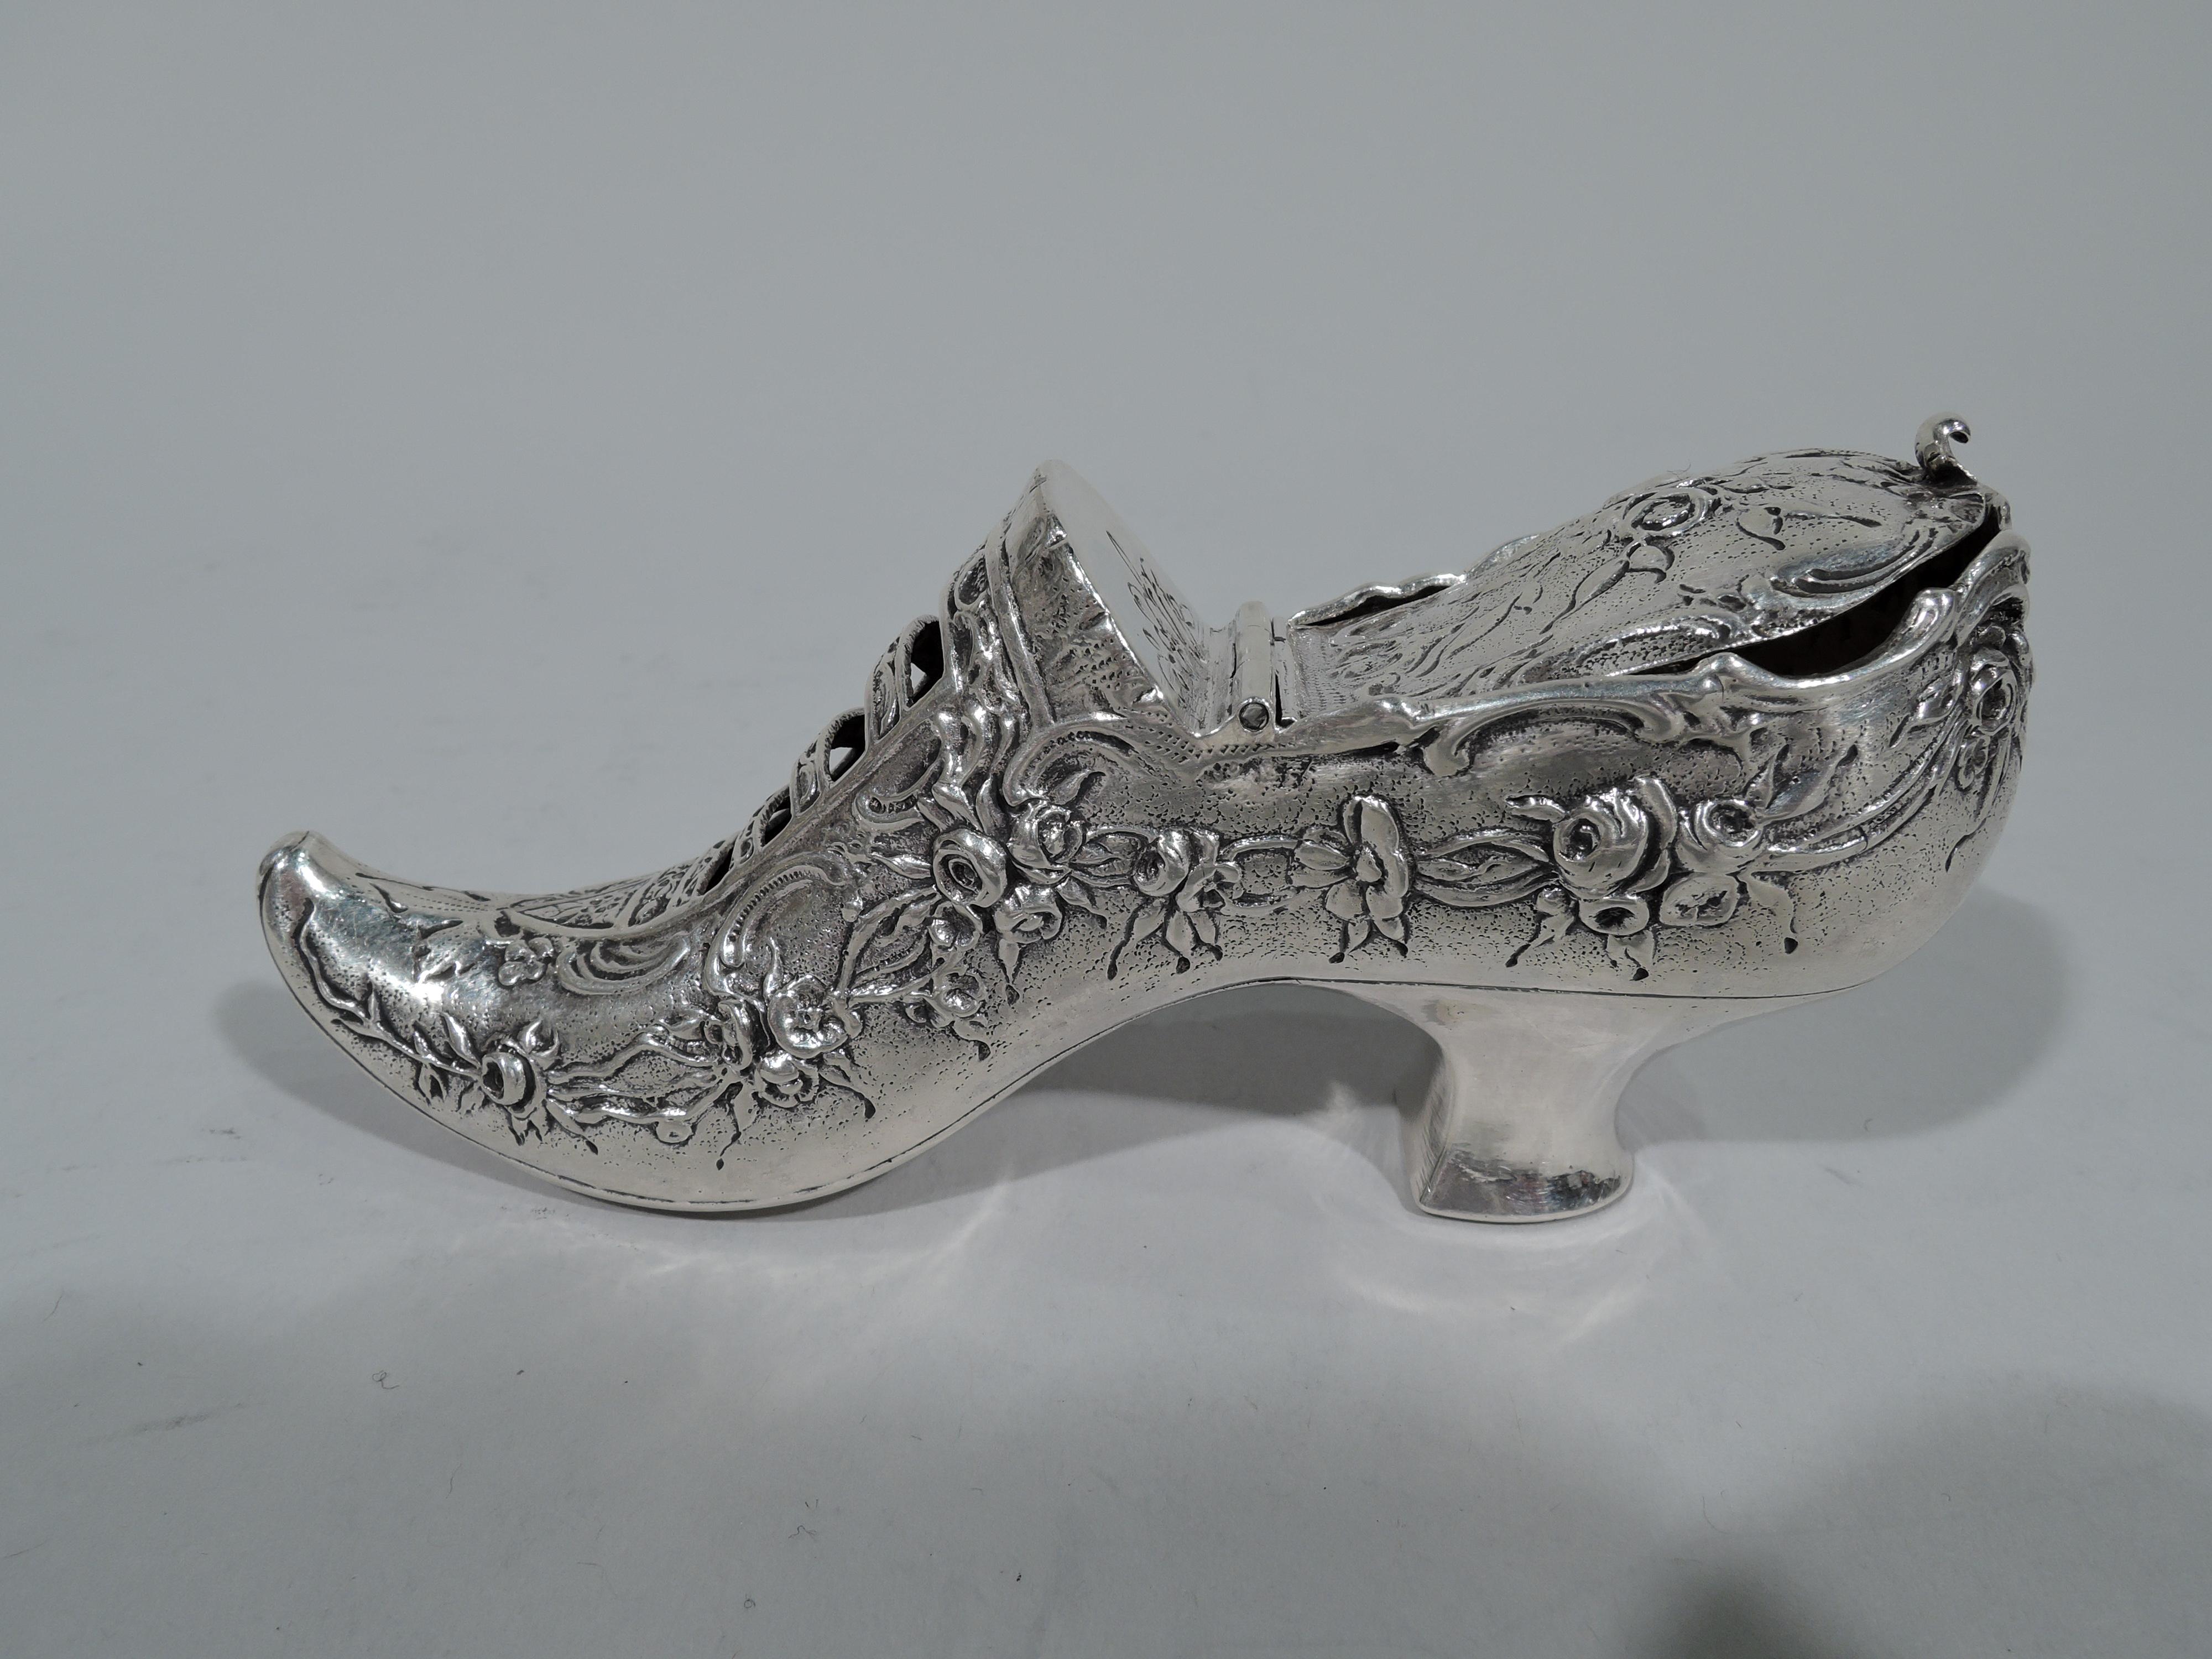 German 930 silver novelty trinket box. Imported to England in 1900 by Elly Isaac Miller in London. Rococo shoe with chased floral garlands and open bands. Insole has hinged cover. Raised elf toe and plain heel. German maker’s and English importer's